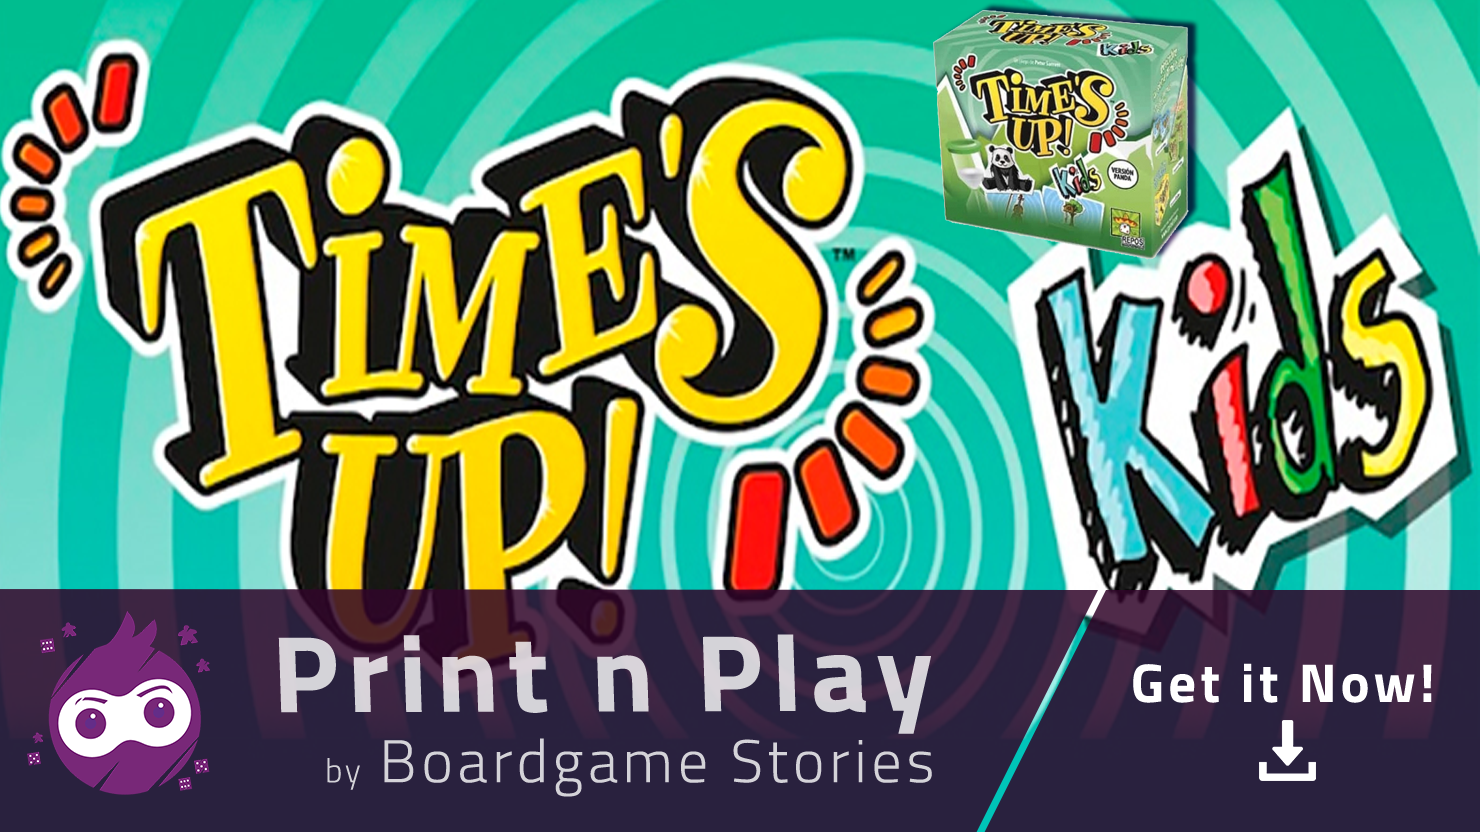 Time's Up! Kids - Print n Play - Boardgame Stories